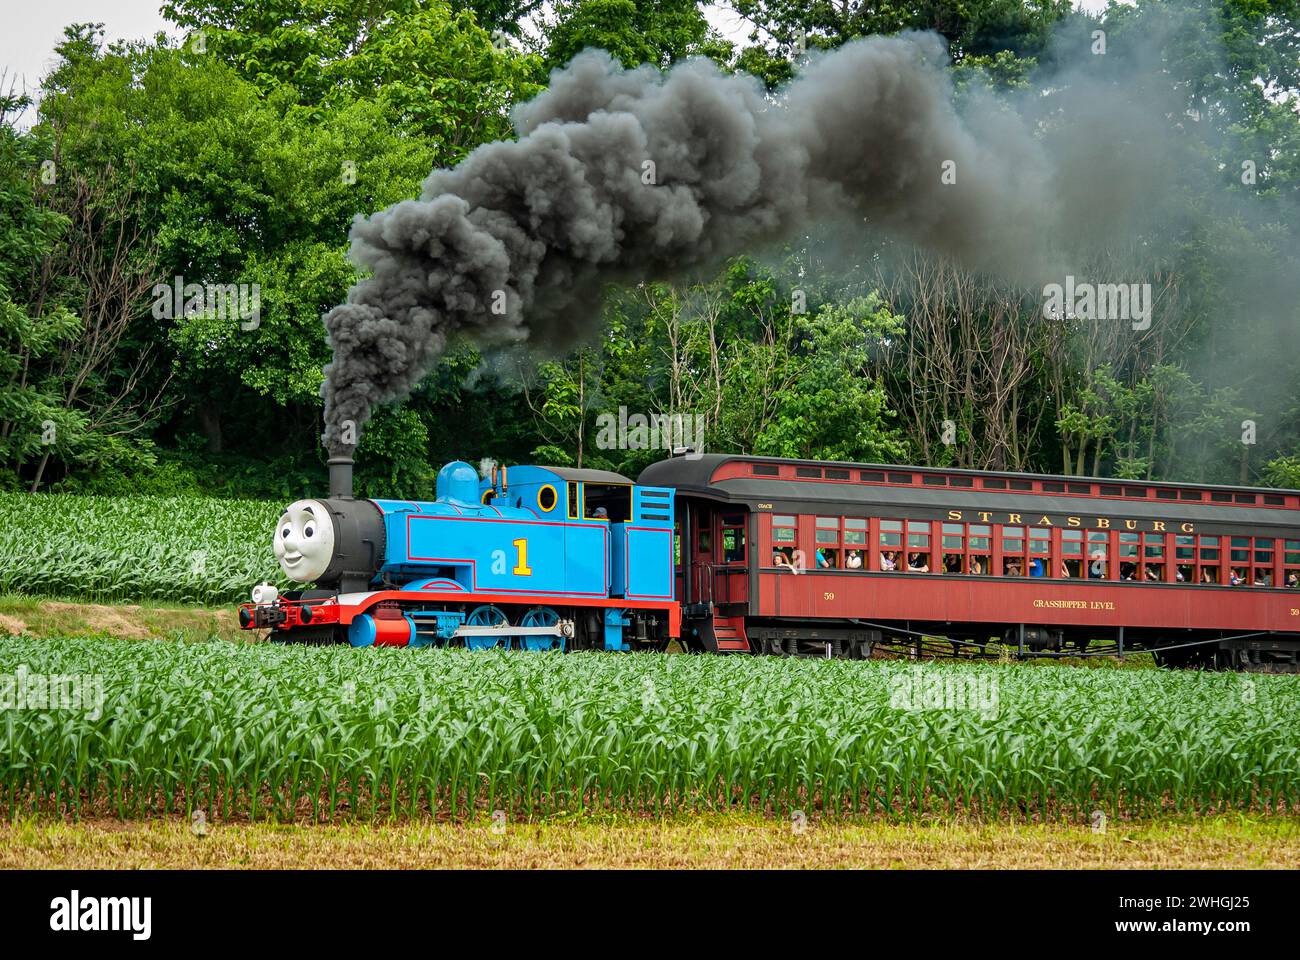 View of Thomas the Train Pulling Passenger Cars Blowing Smoke and Steam Stock Photo